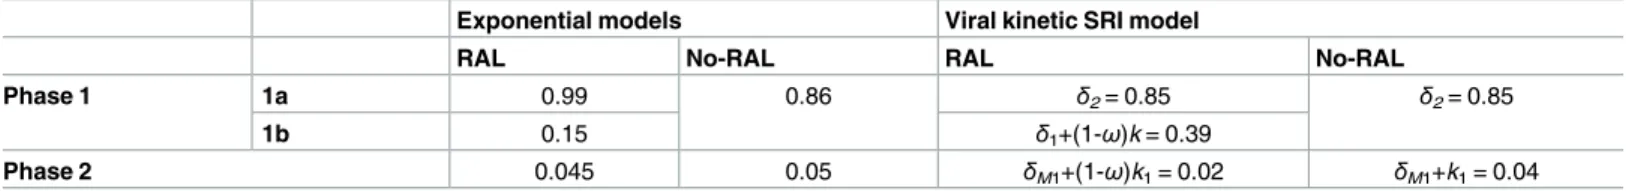 Table 1. Comparison of the viral load decay rates during treatment with or without RAL